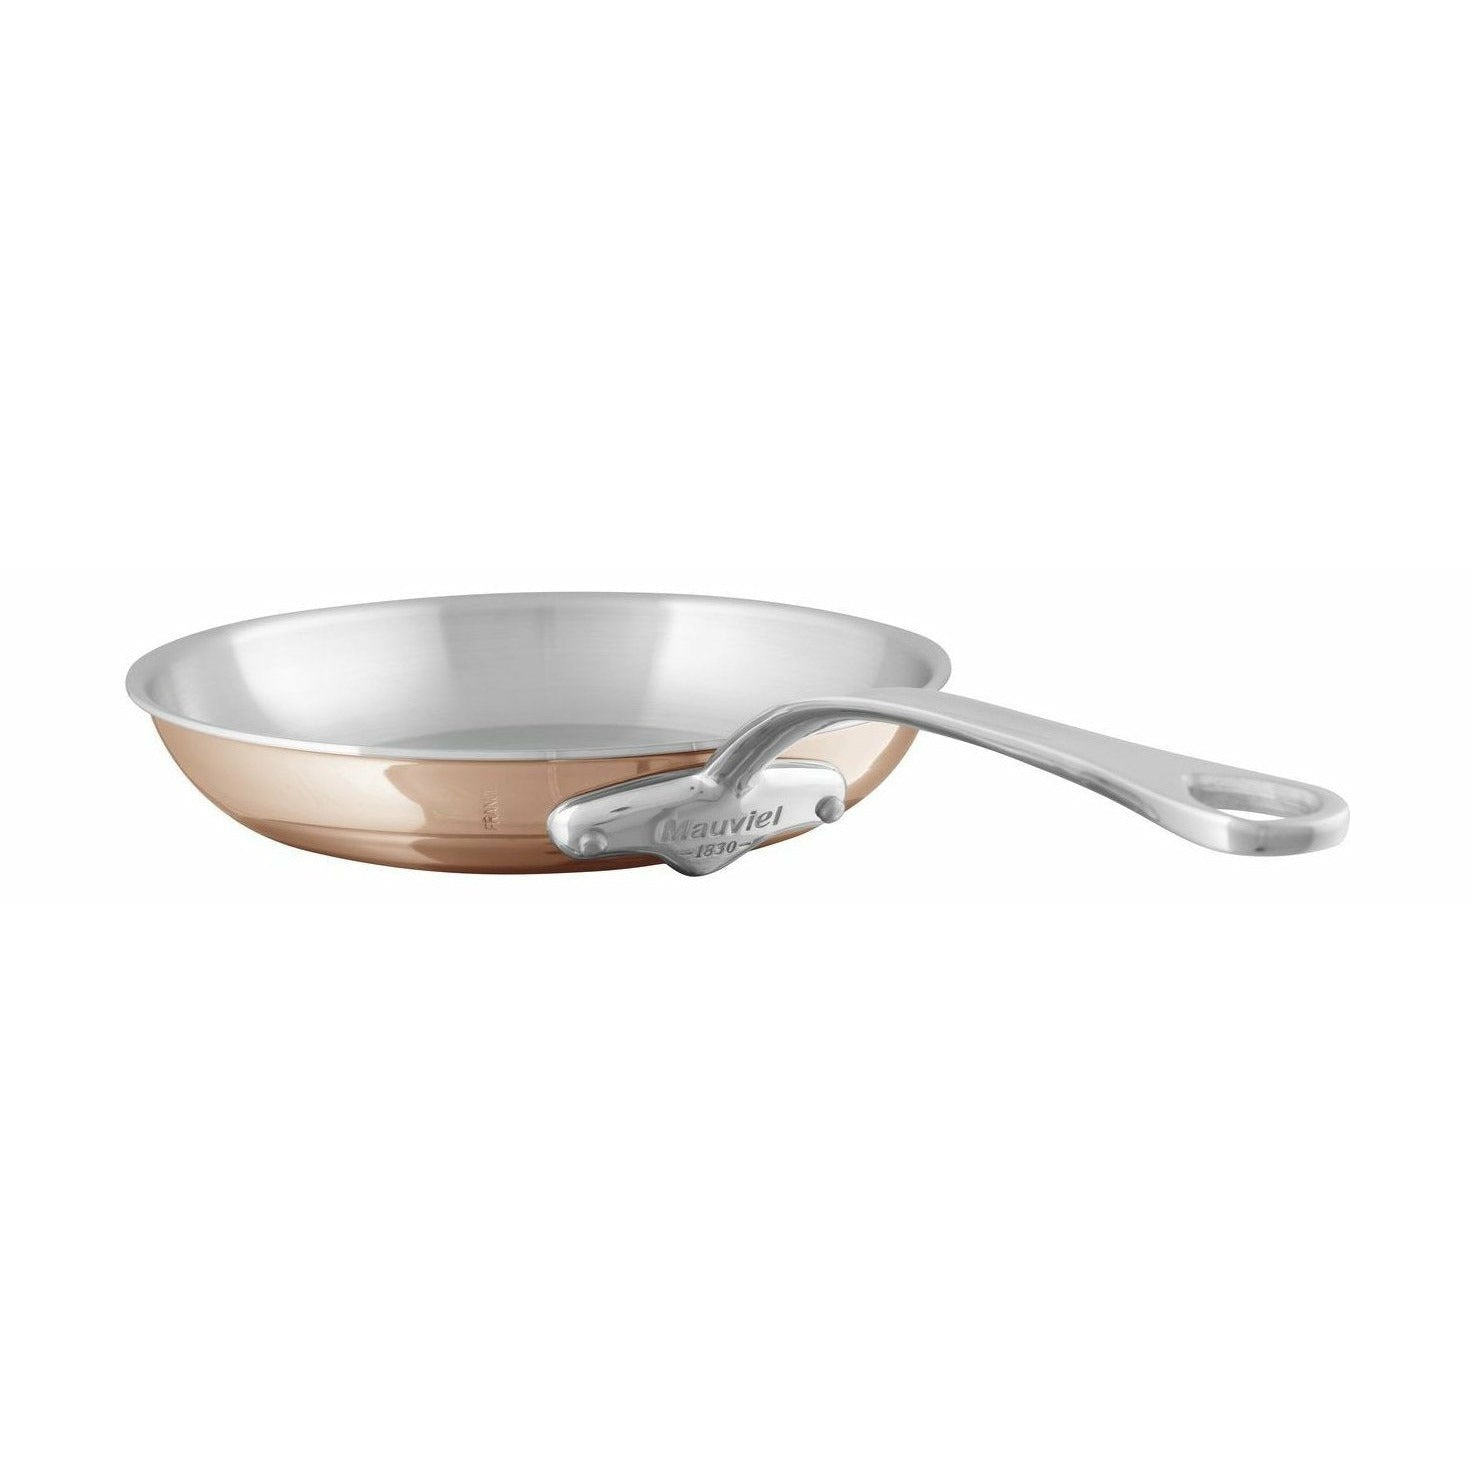 Mauviel M"6s Frying Pan Copper/Stainless Steel, ø 26 Cm